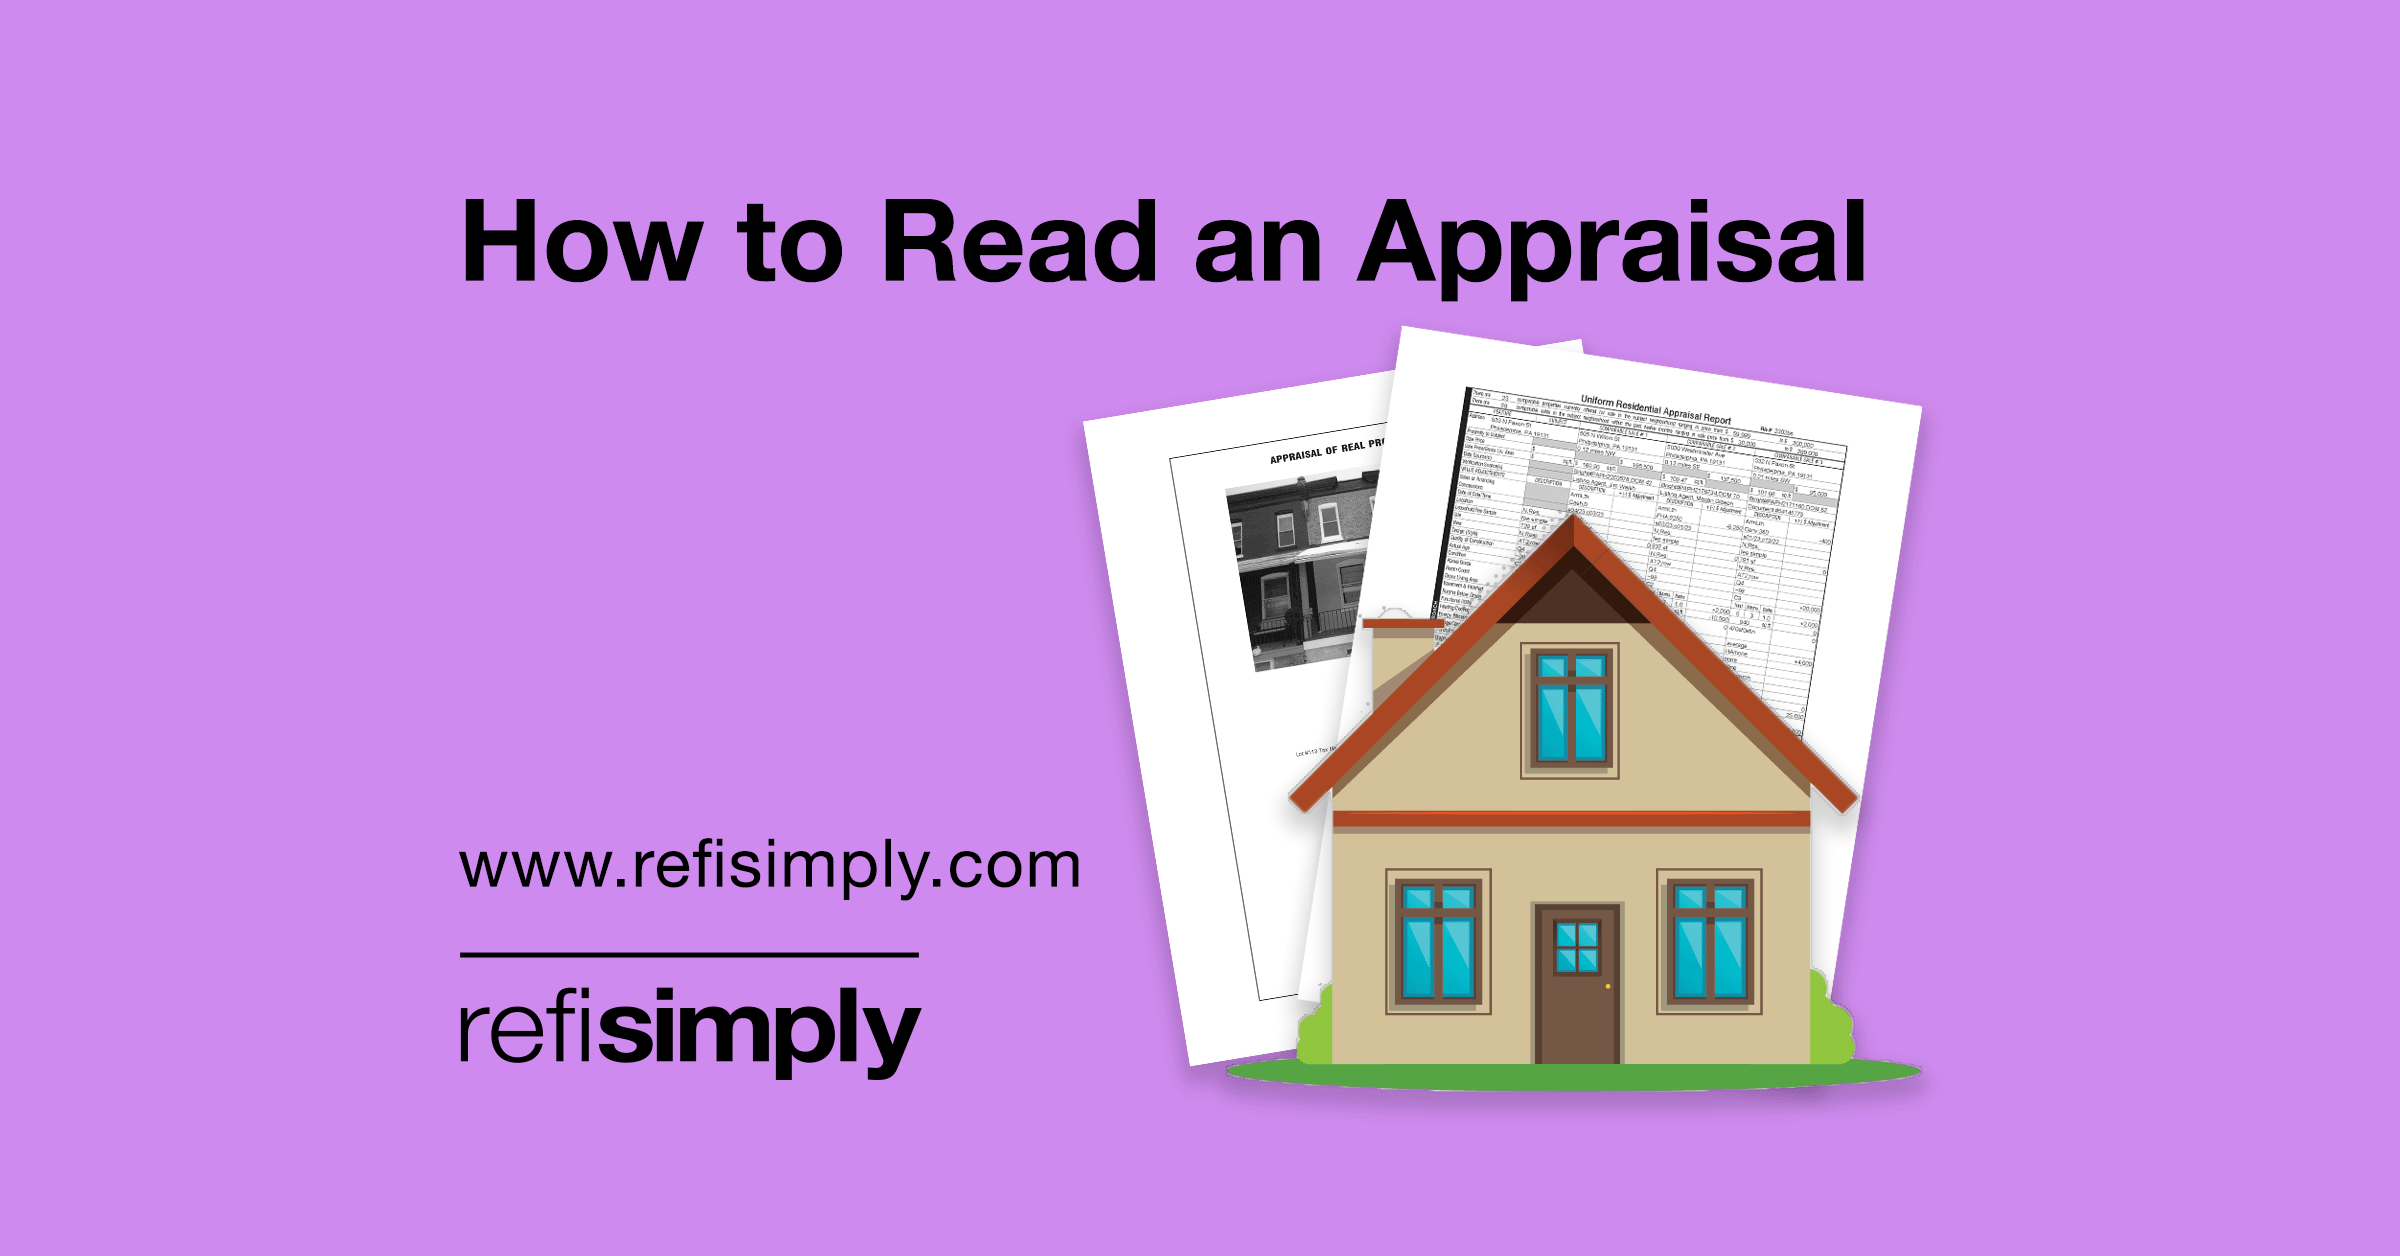 How to read an appraisal